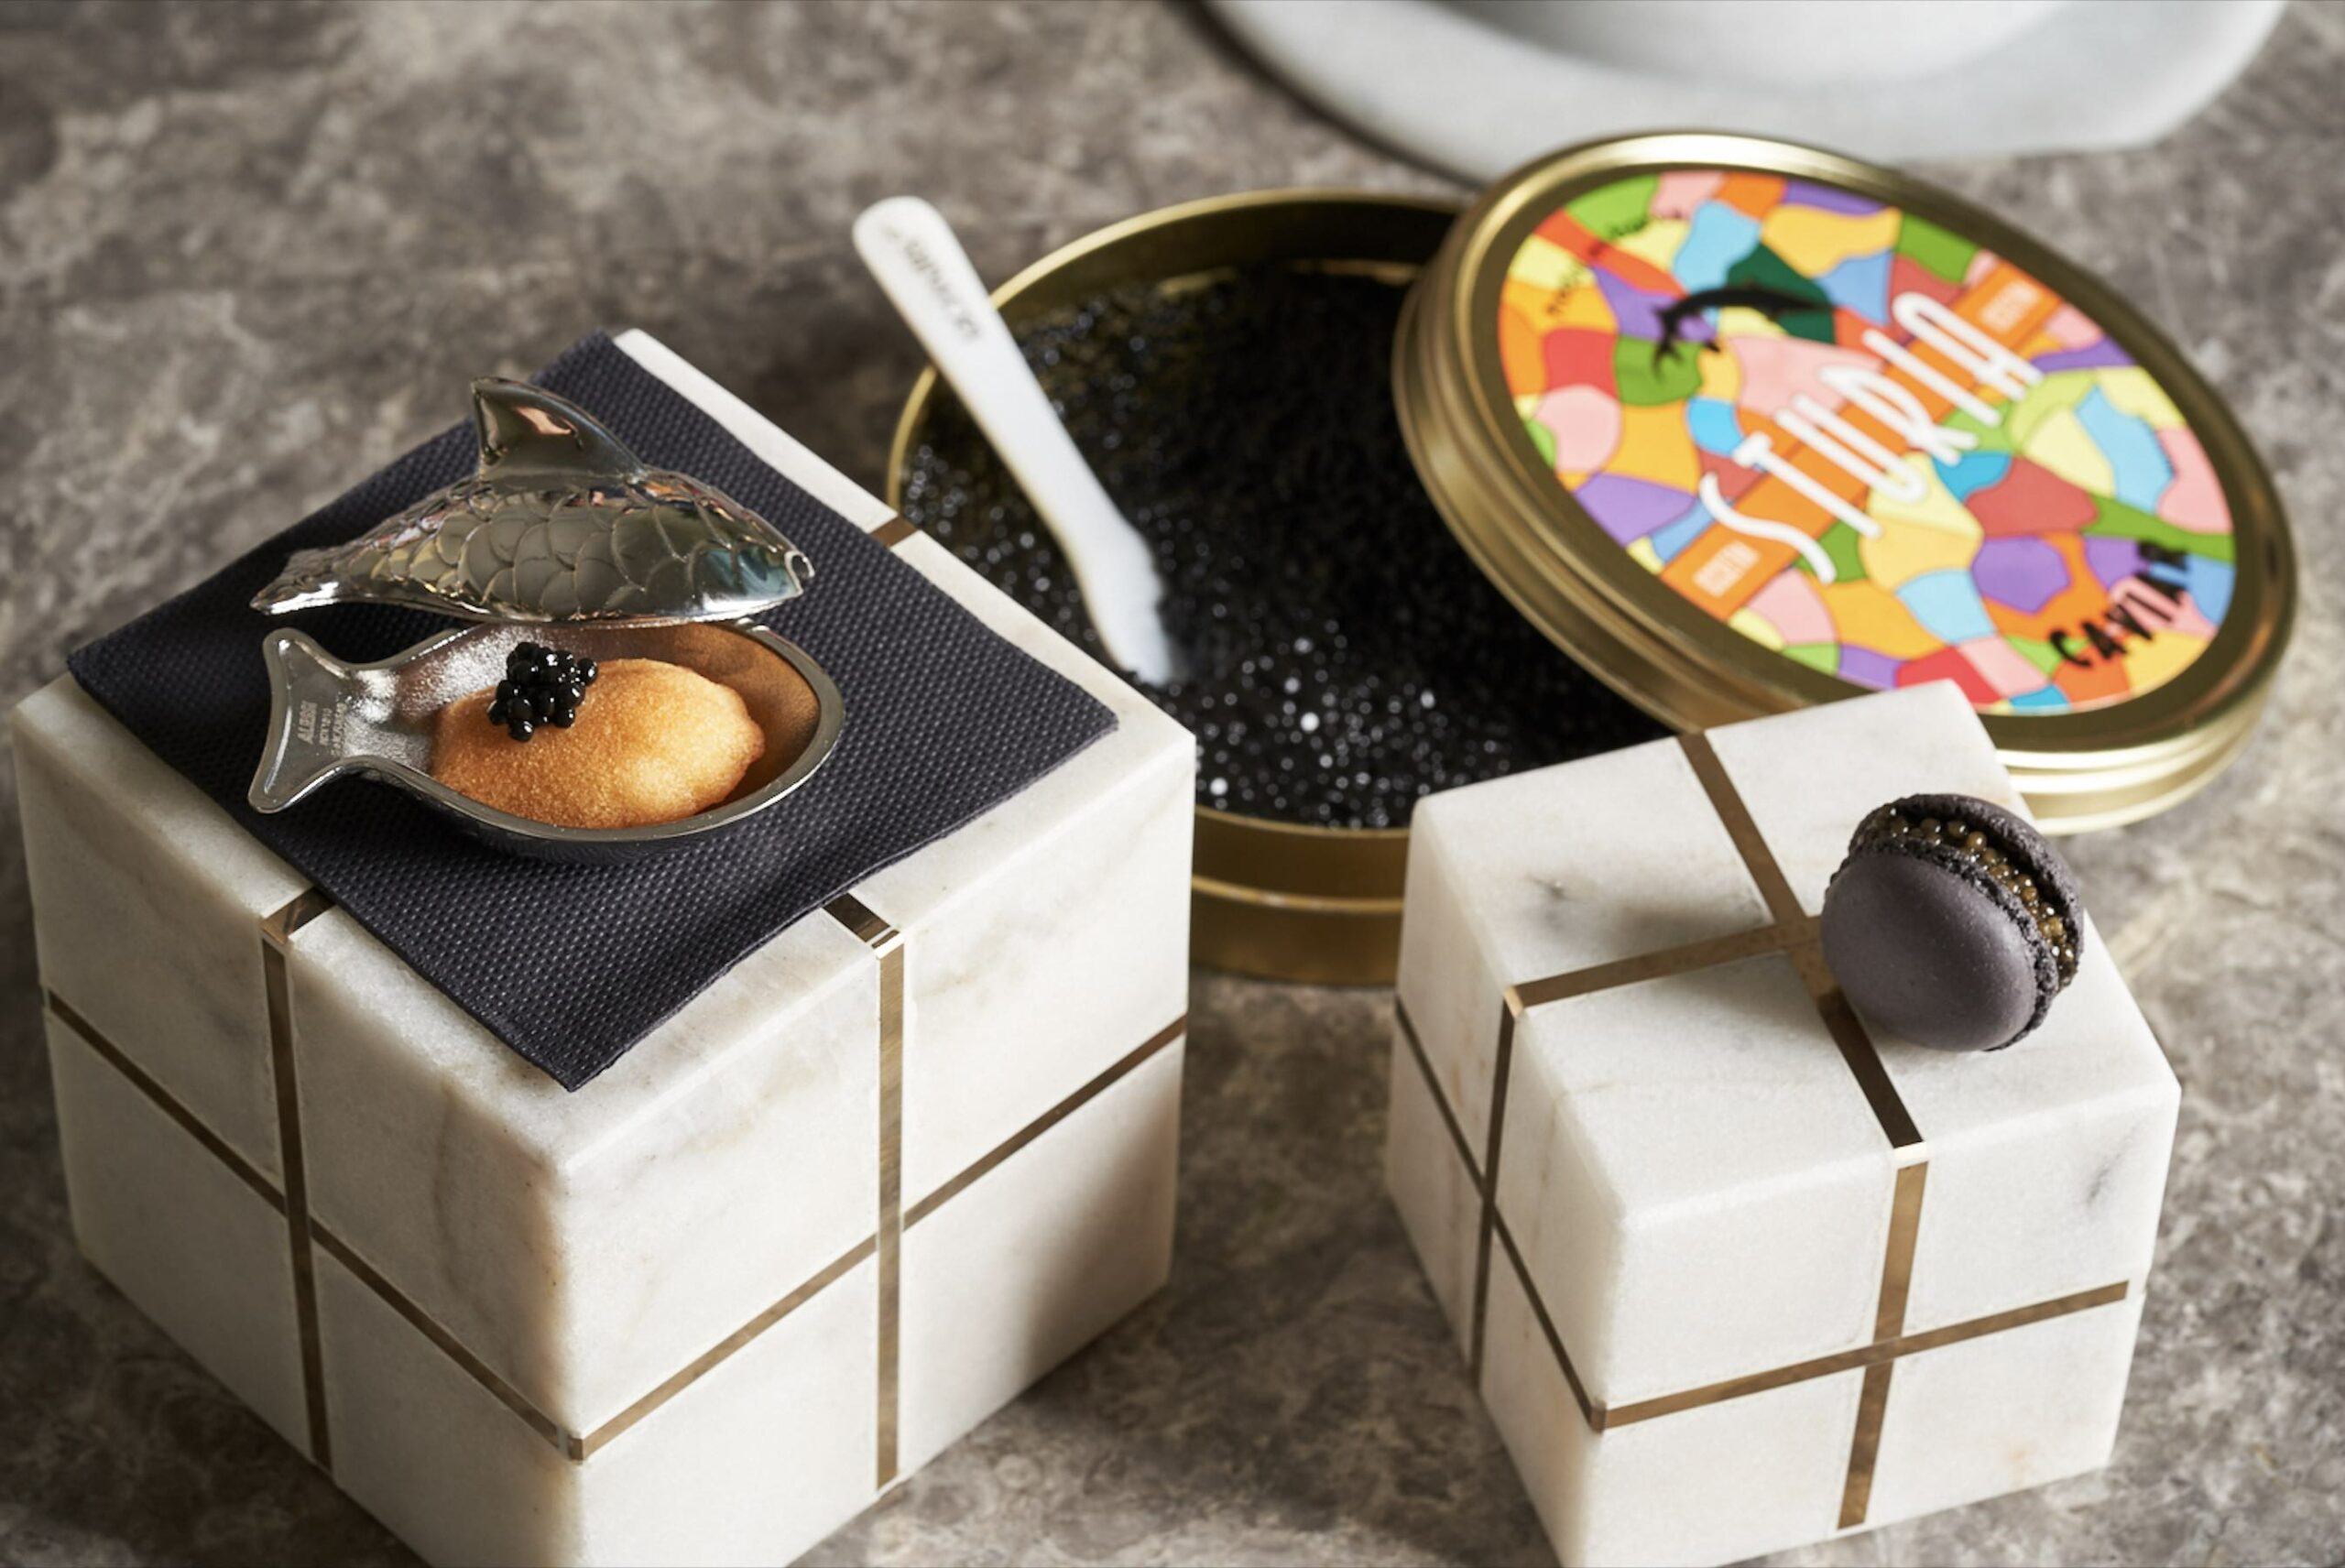 caviar-in-dubai:-9-of-the-best-caviar-dishes-you-need-to-try